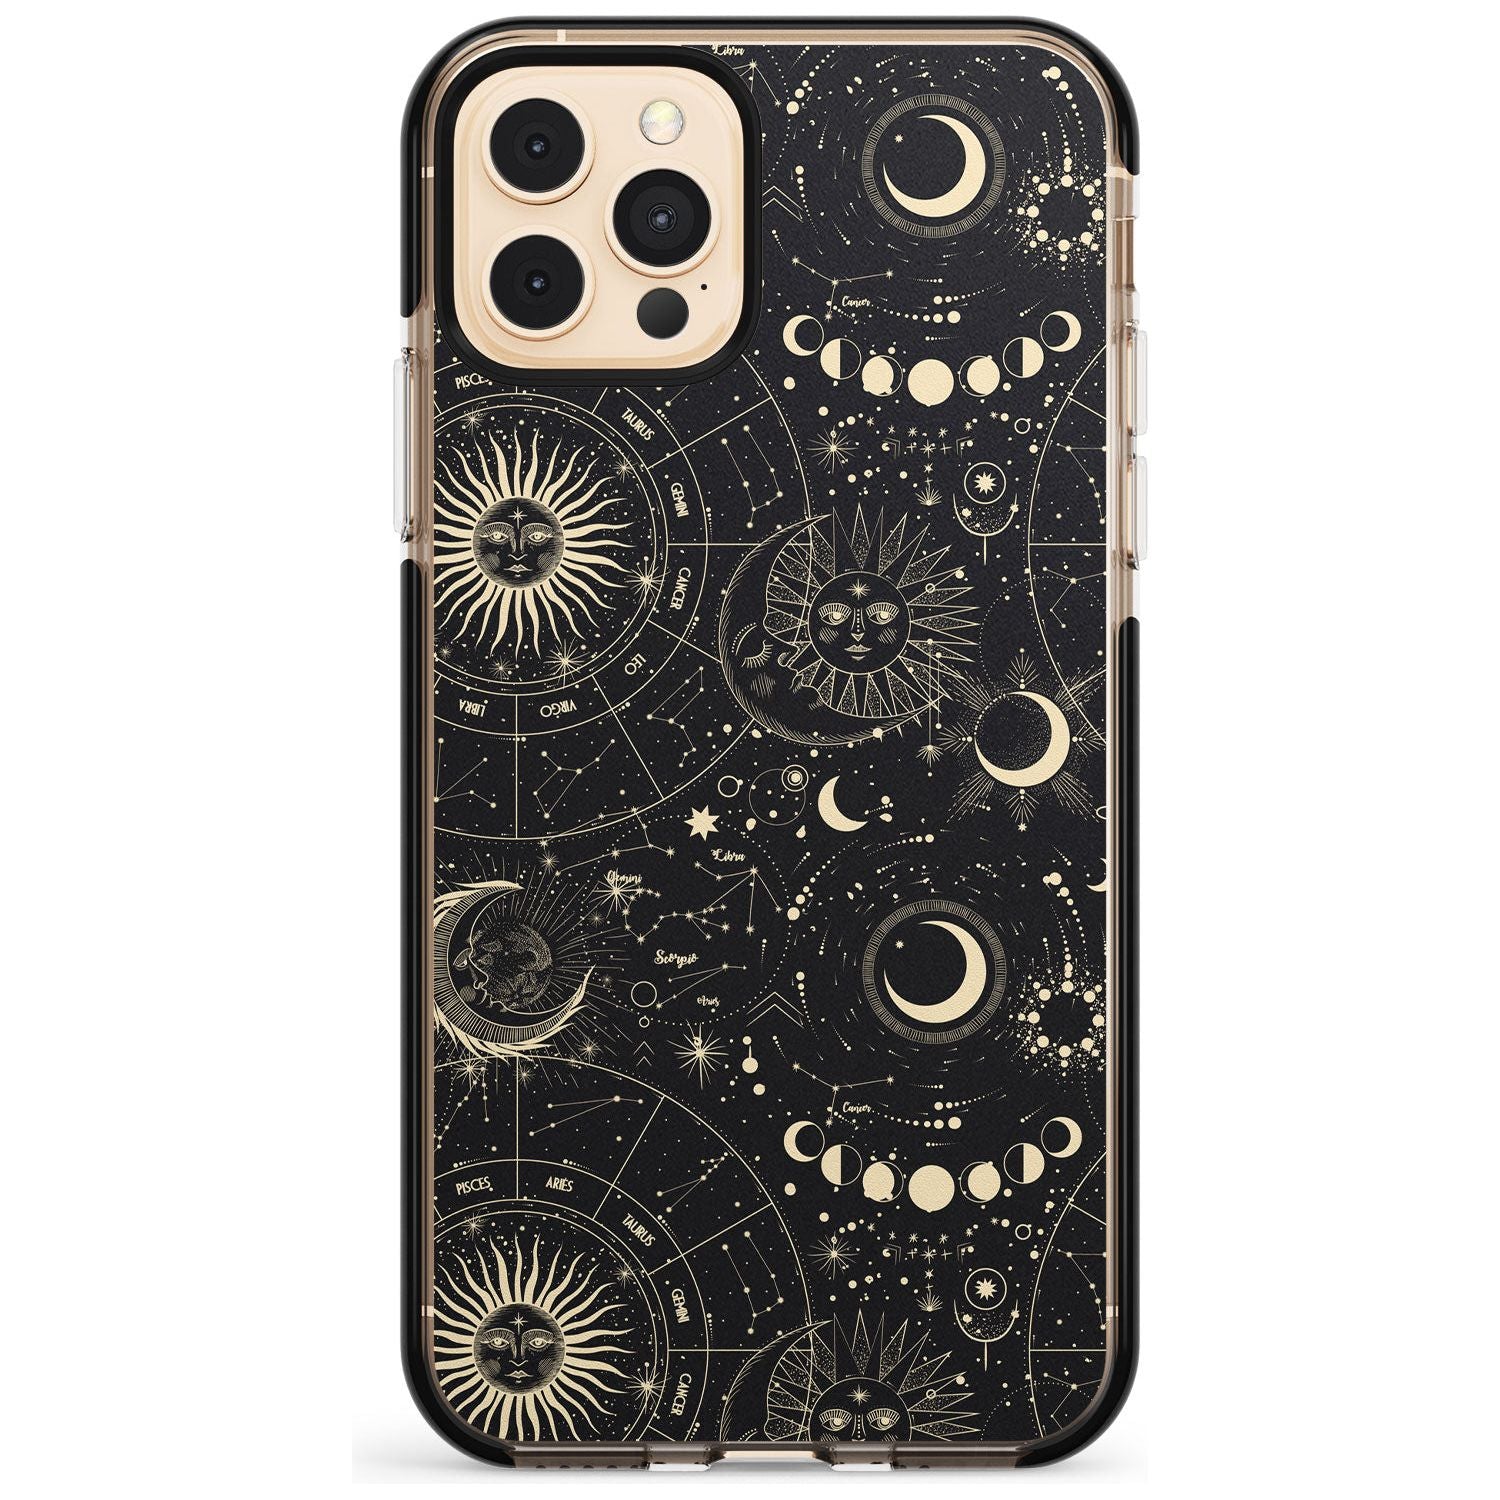 Suns, Moons & Star Signs Pink Fade Impact Phone Case for iPhone 11